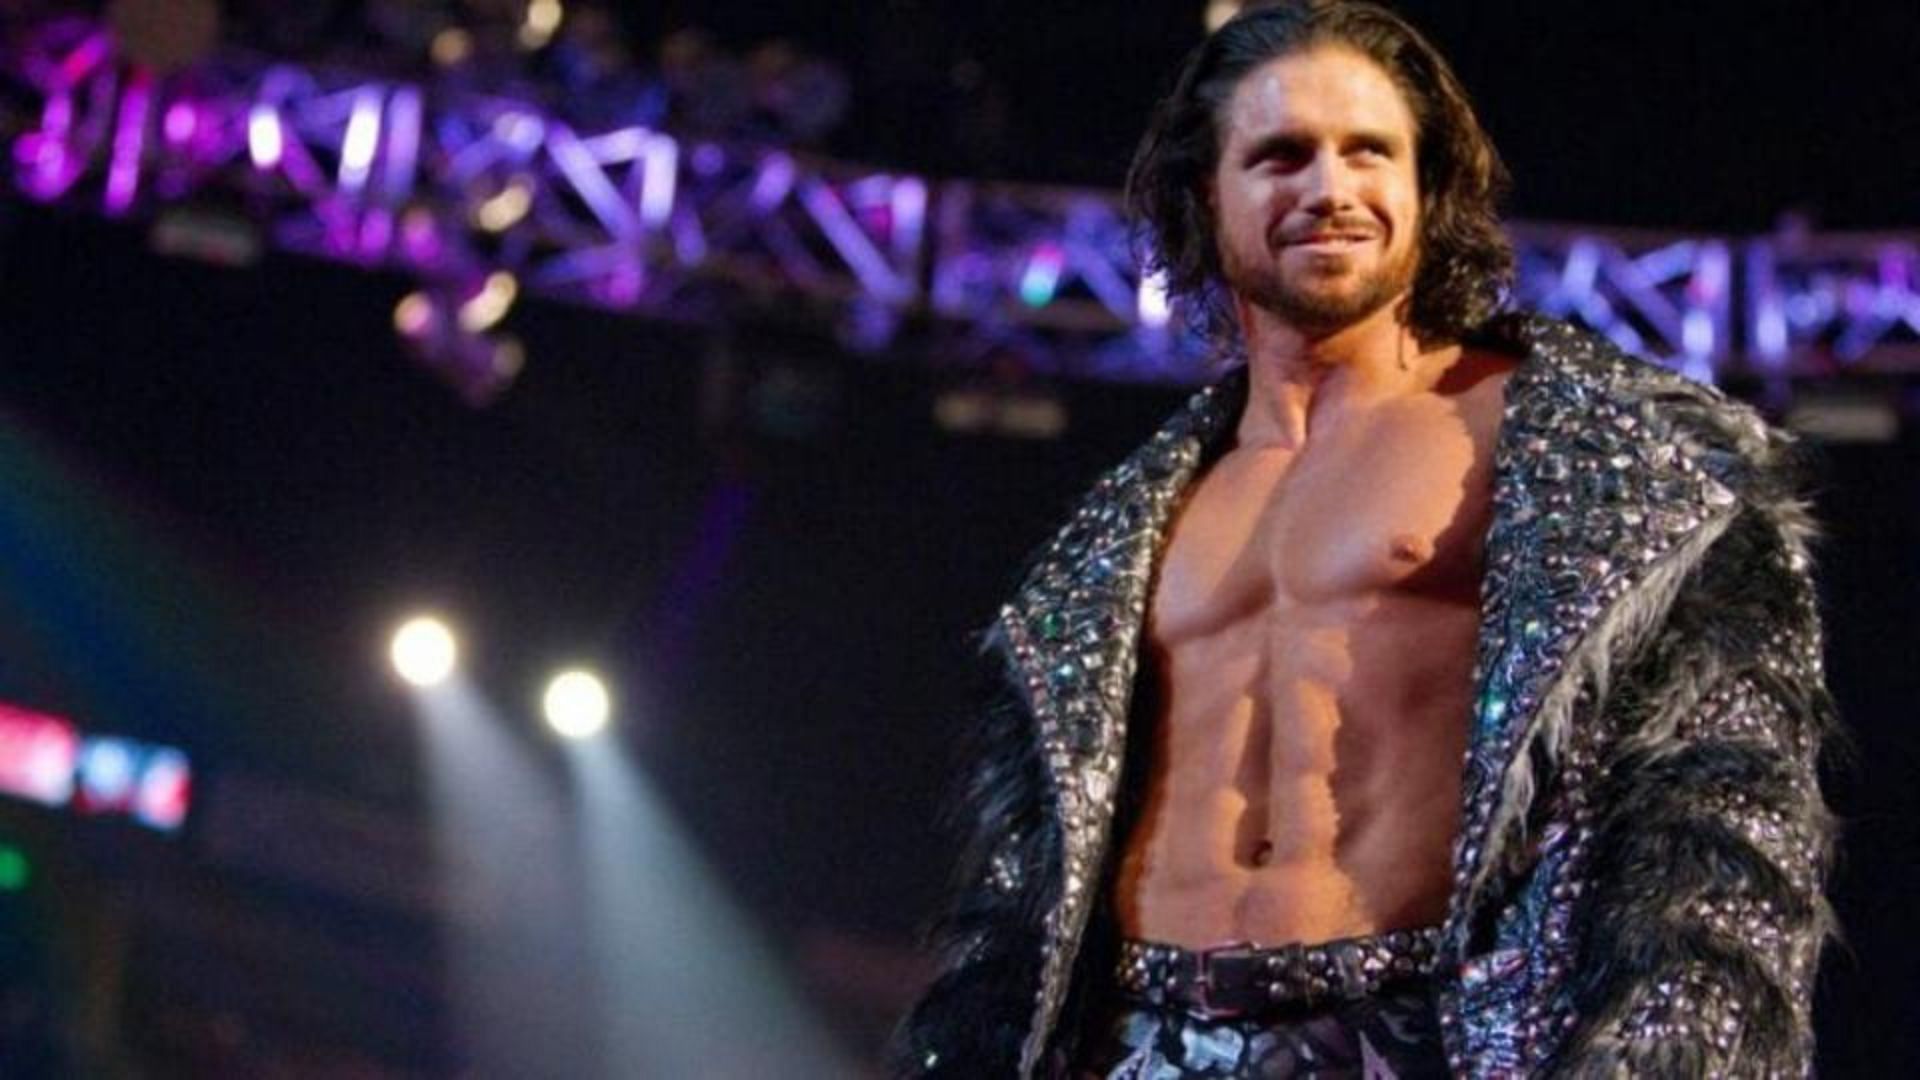 John Morrison will be facing Taya Valkyrie in a tag team match